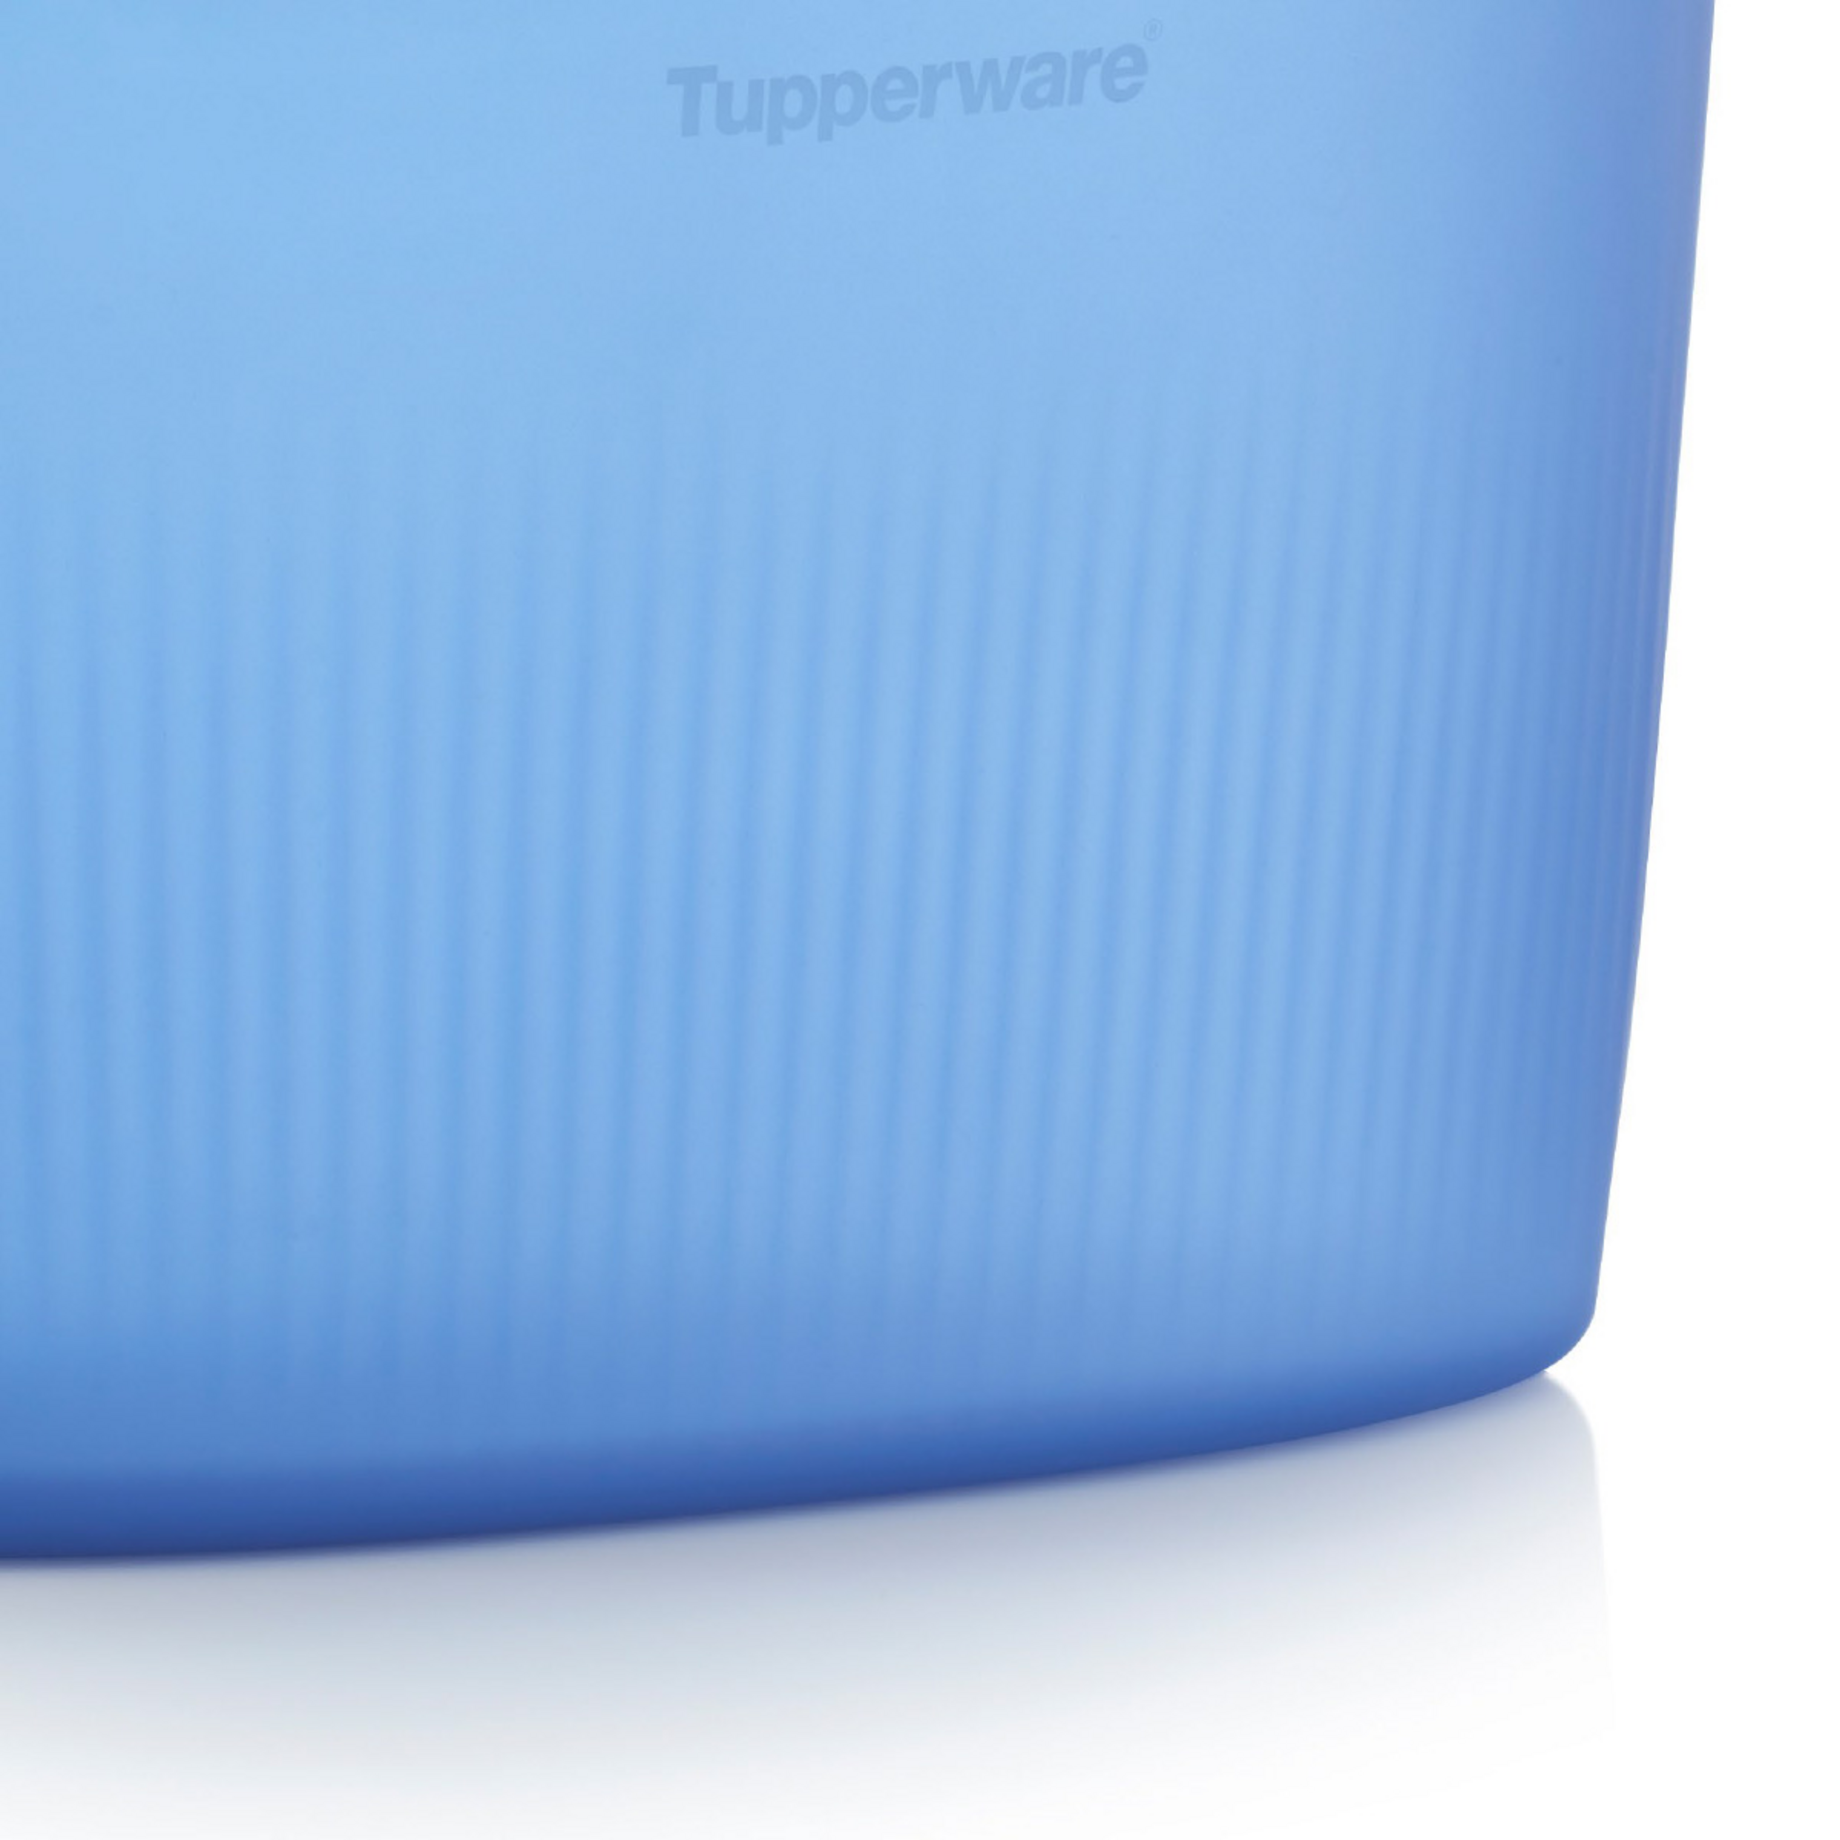 https://appng.tupperware.eu/service/appng/tupperware-products/rest/autoCrop/494849/1840/x